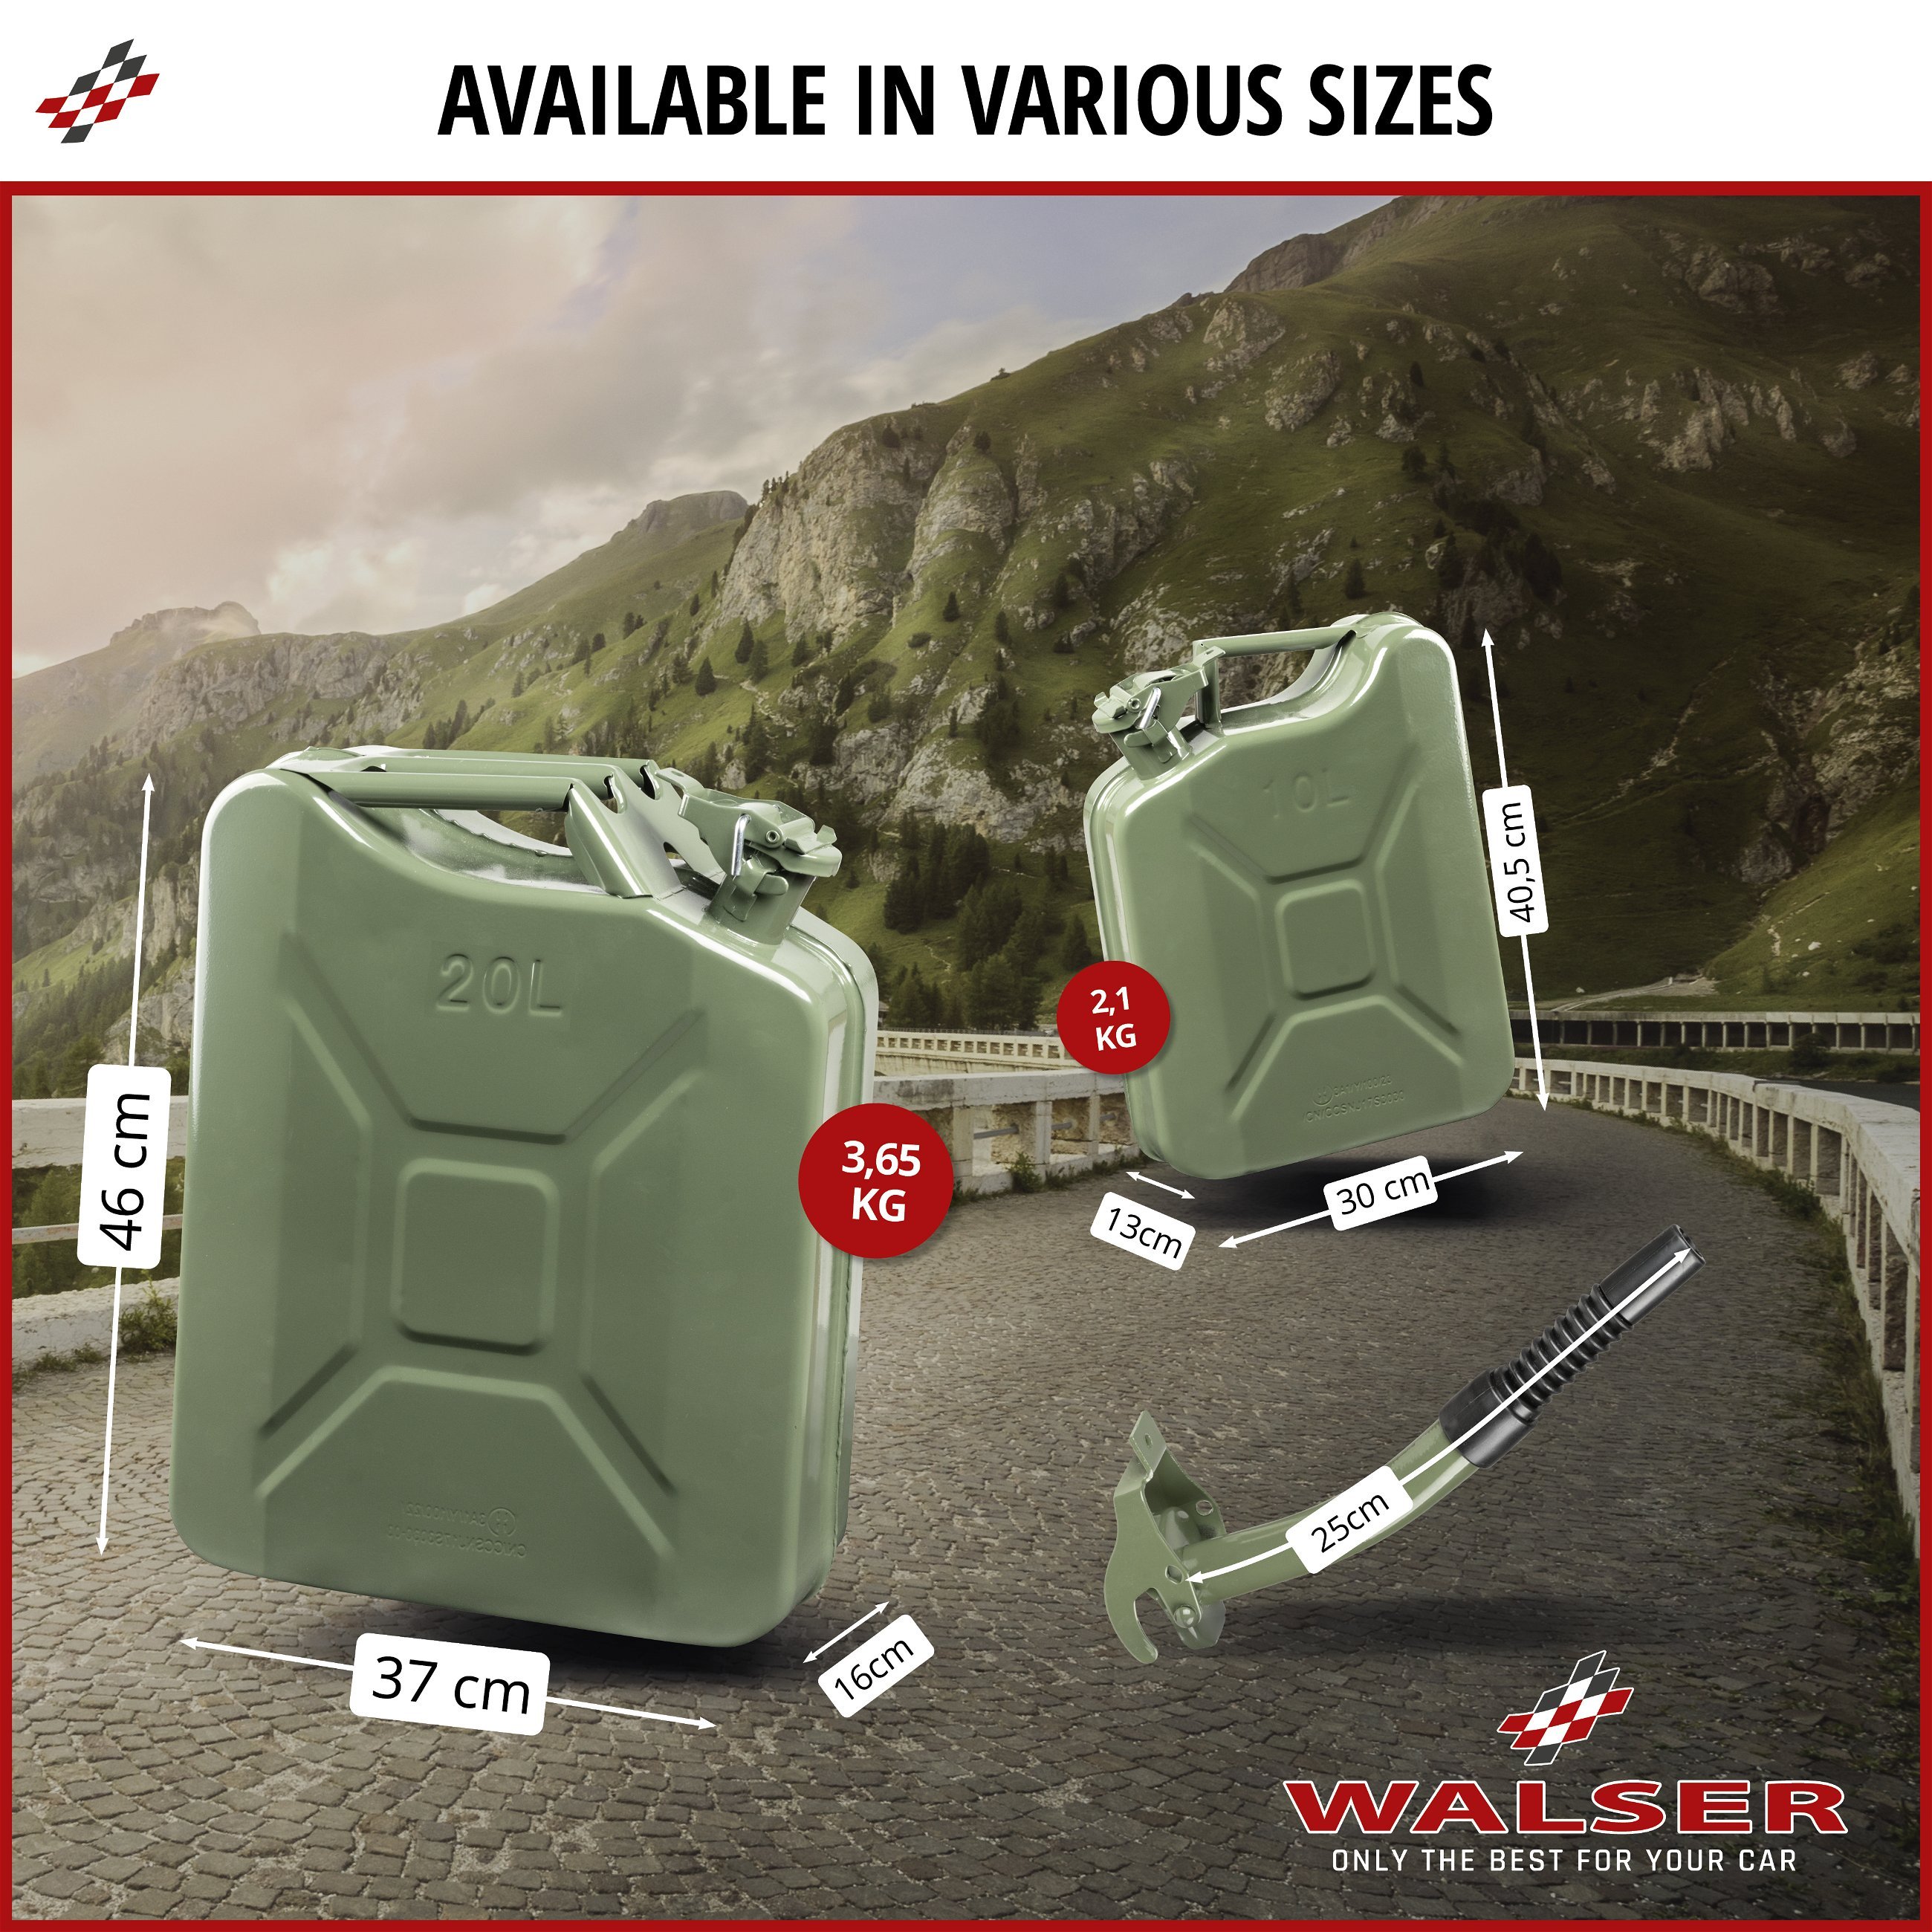 Petrol canister metal 10 litres, fuel canister, UN-certified diesel canister with safety cap 3A1 olive green, 30x13x40,5 cm